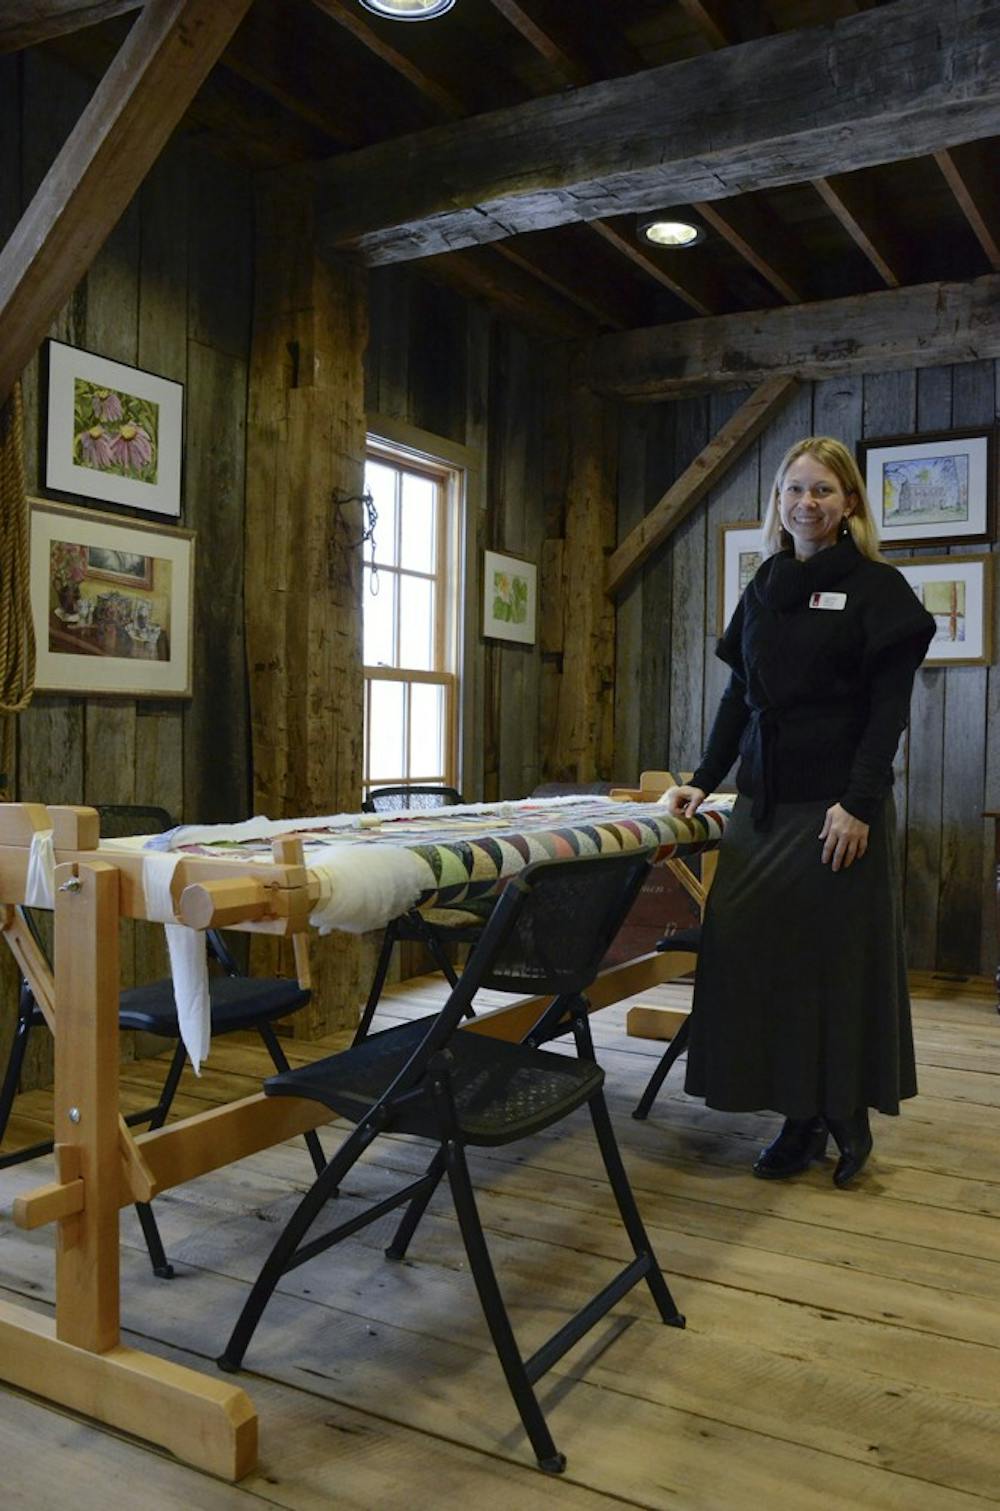 Carey Beam, Director of the Wylie House Museum, stands near a quilt machine in the Morton C. Bradley, Jr. Education Center. The Wylie House will be hosting the Bloomington Water Color Society's exhibit "We Paint... Heirlooms!" It will be on display through April at the Center (the barn next door to the Wylie House Museum). 